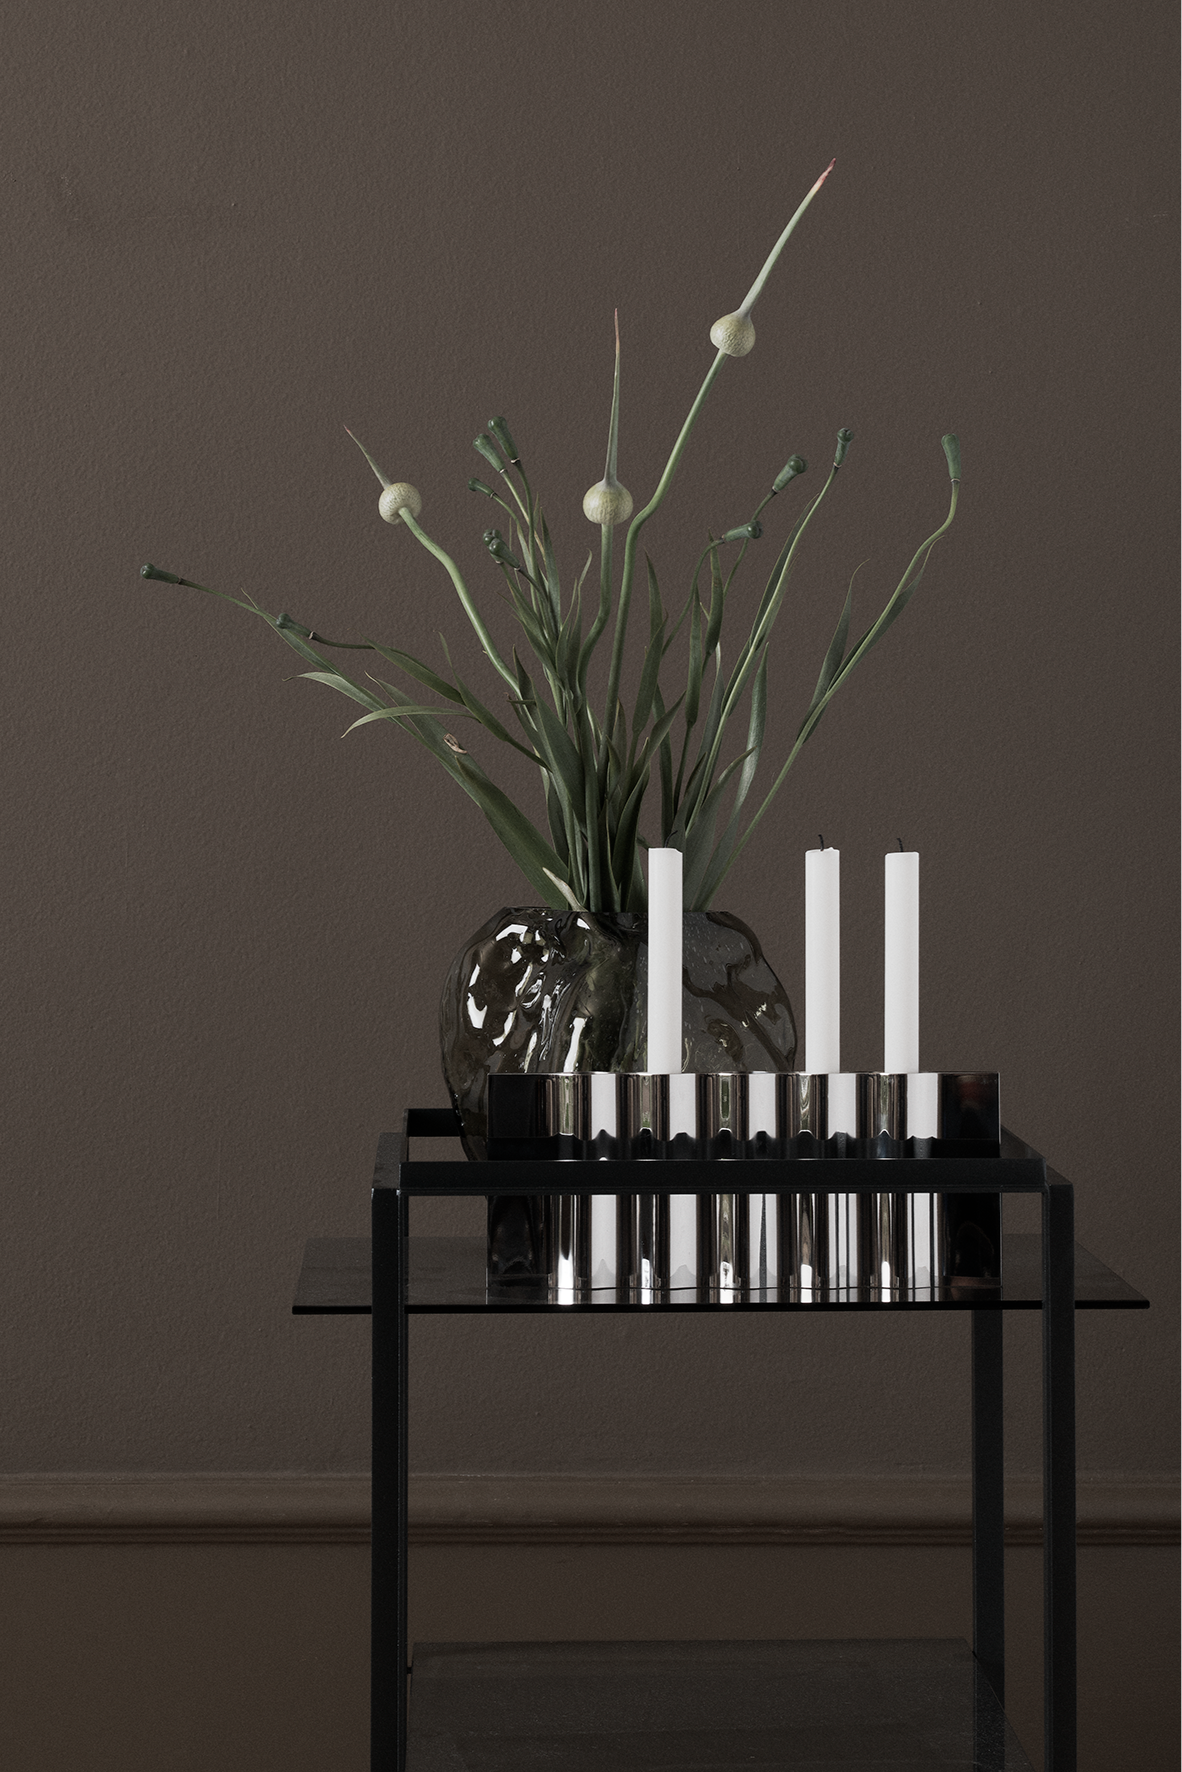 Ripply Candle Holder from New Works, by designer Cristián Mohaded as decoration